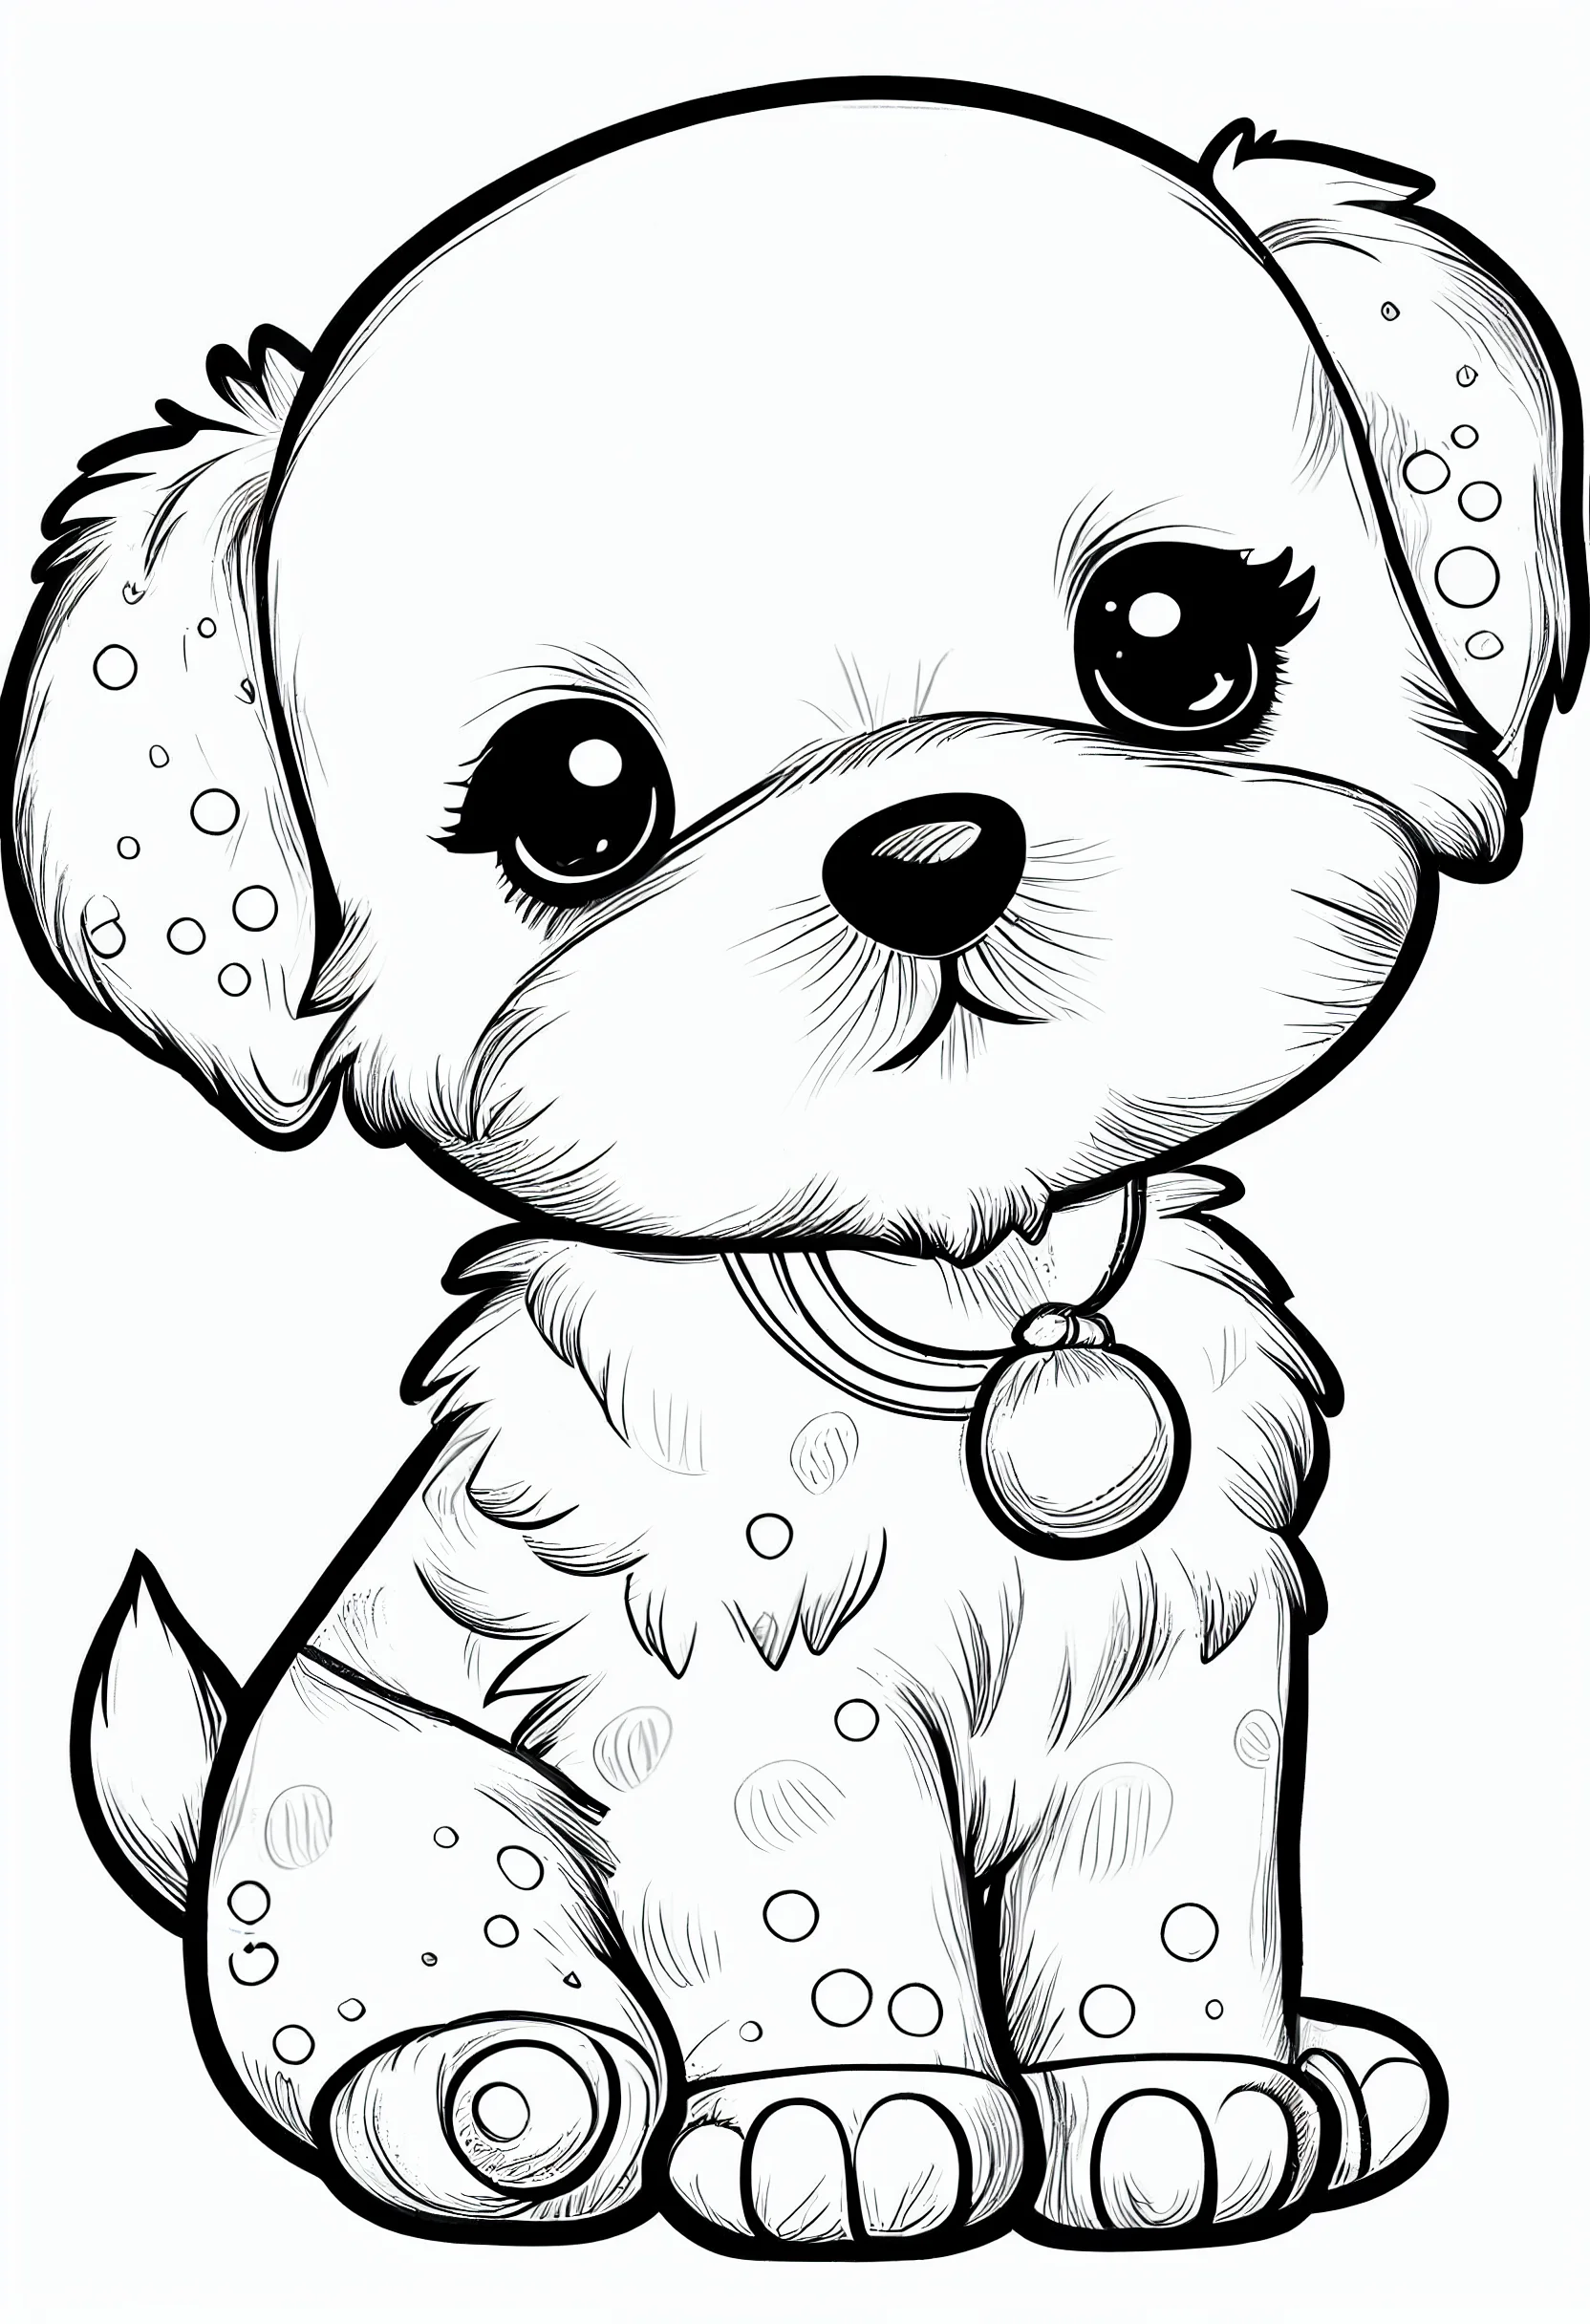 Printable dog puppy coloring pages